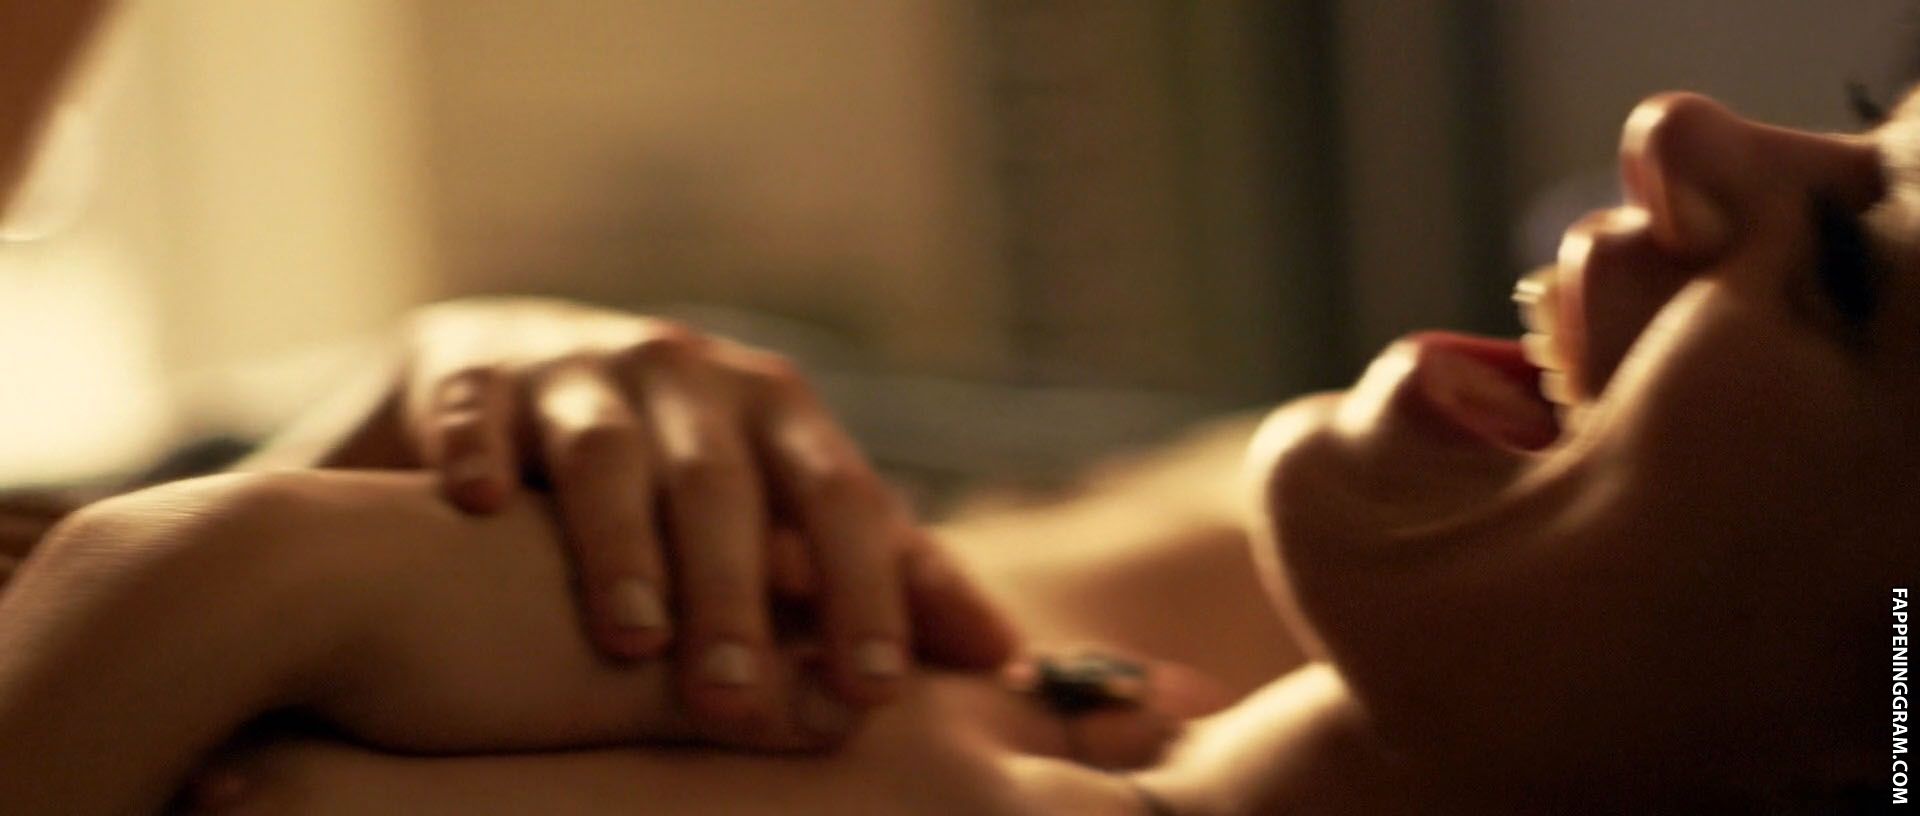 Lindsey shaw sex tape